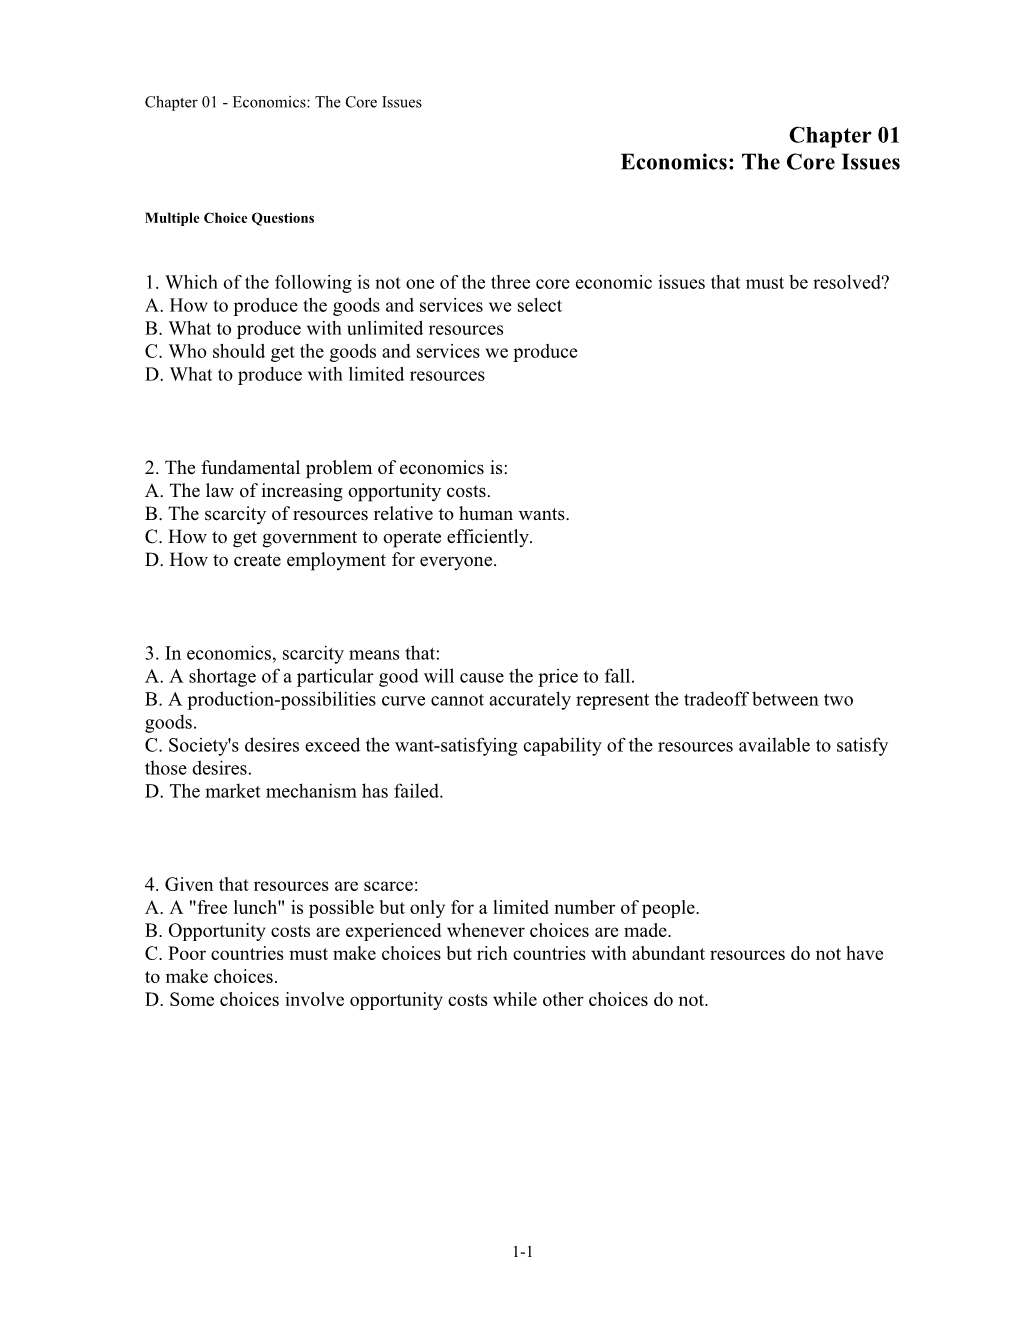 Chapter 01 Economics: the Core Issues